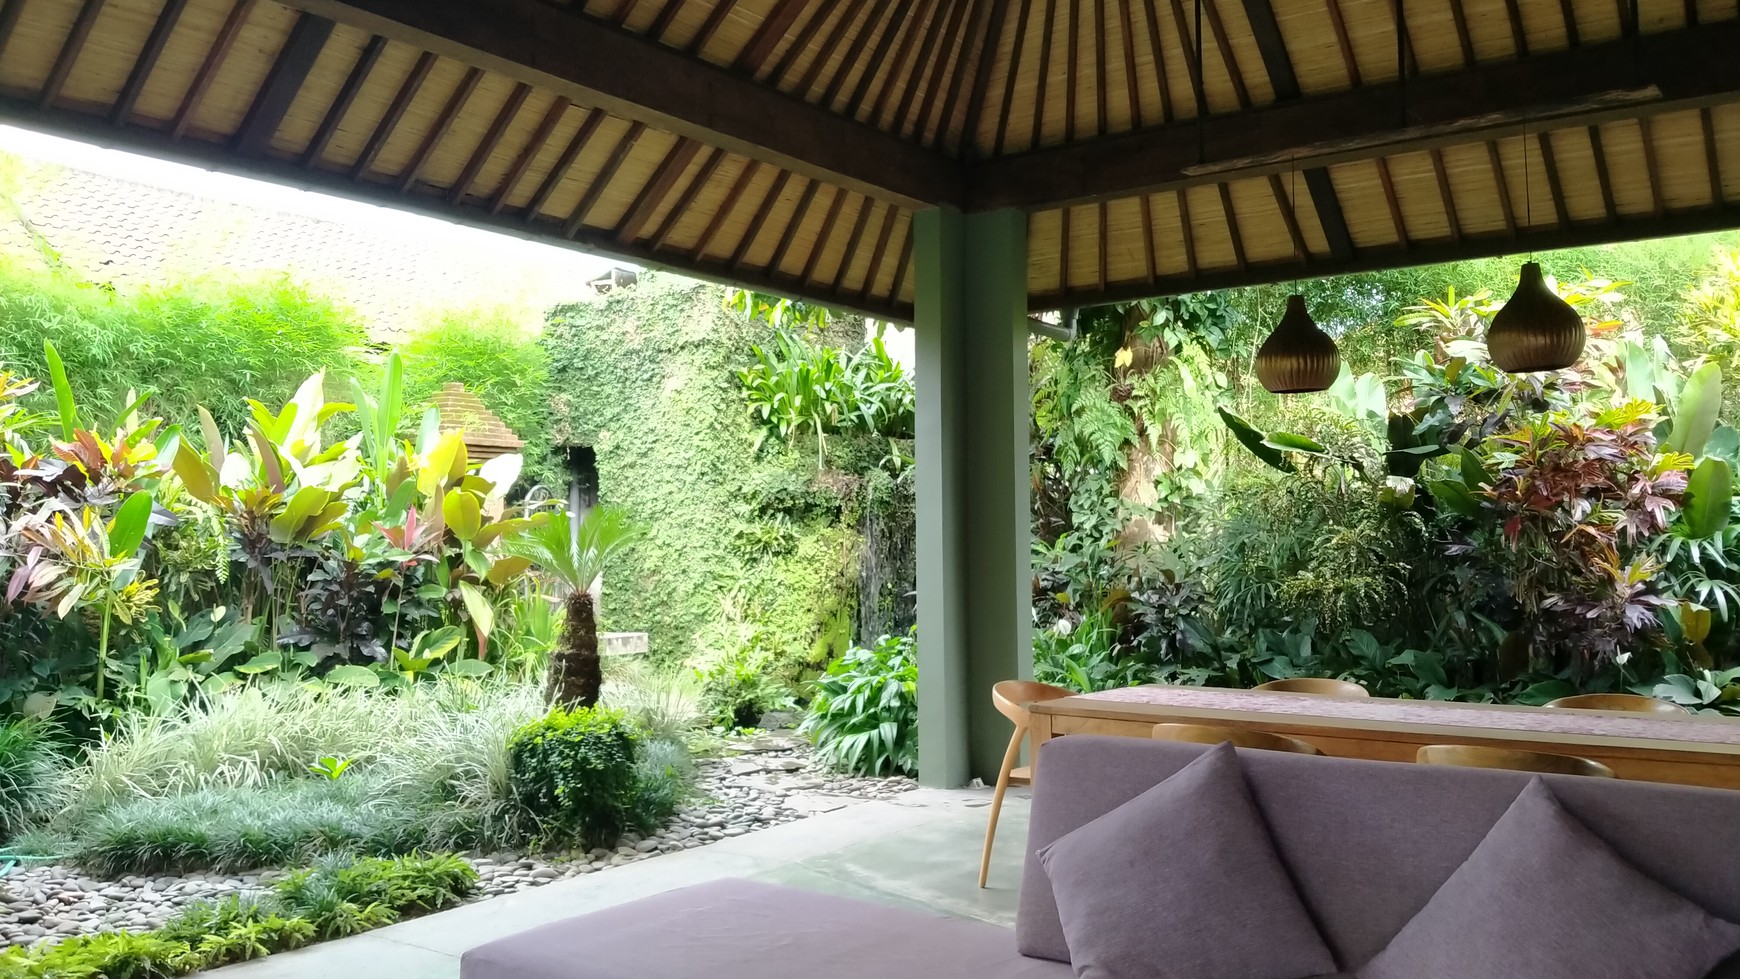 2 Bedroom Leasehold Villa For Sale with Lush Green Views - 10 Minutes From Ubud Center